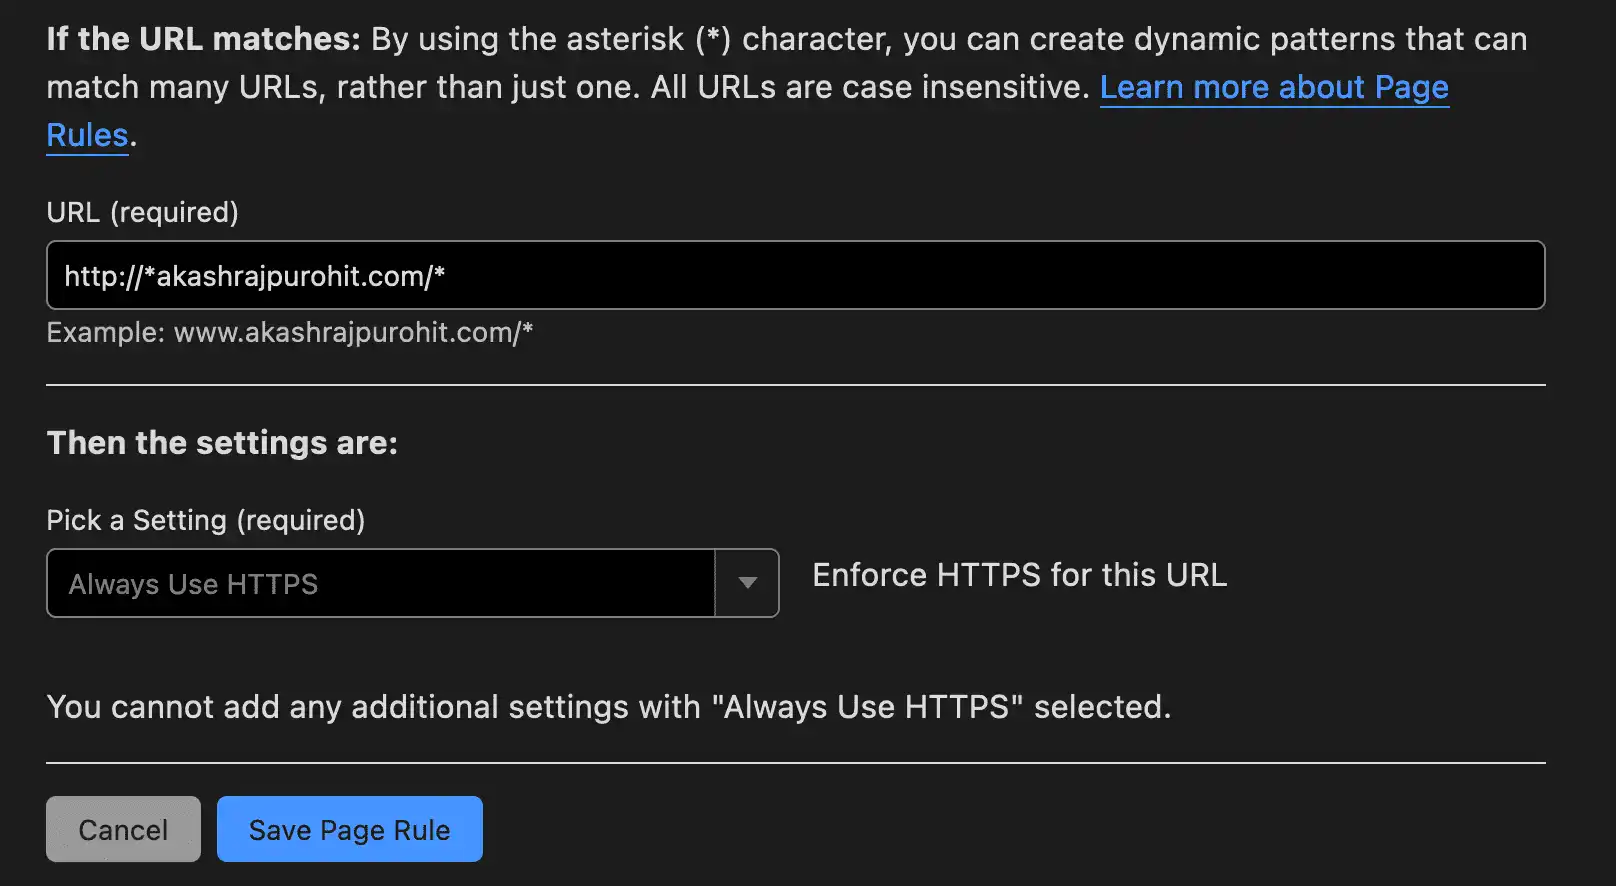 Upgrade to HTTPS for all subdomain and apex domain for all paths which are incoming as HTTP request